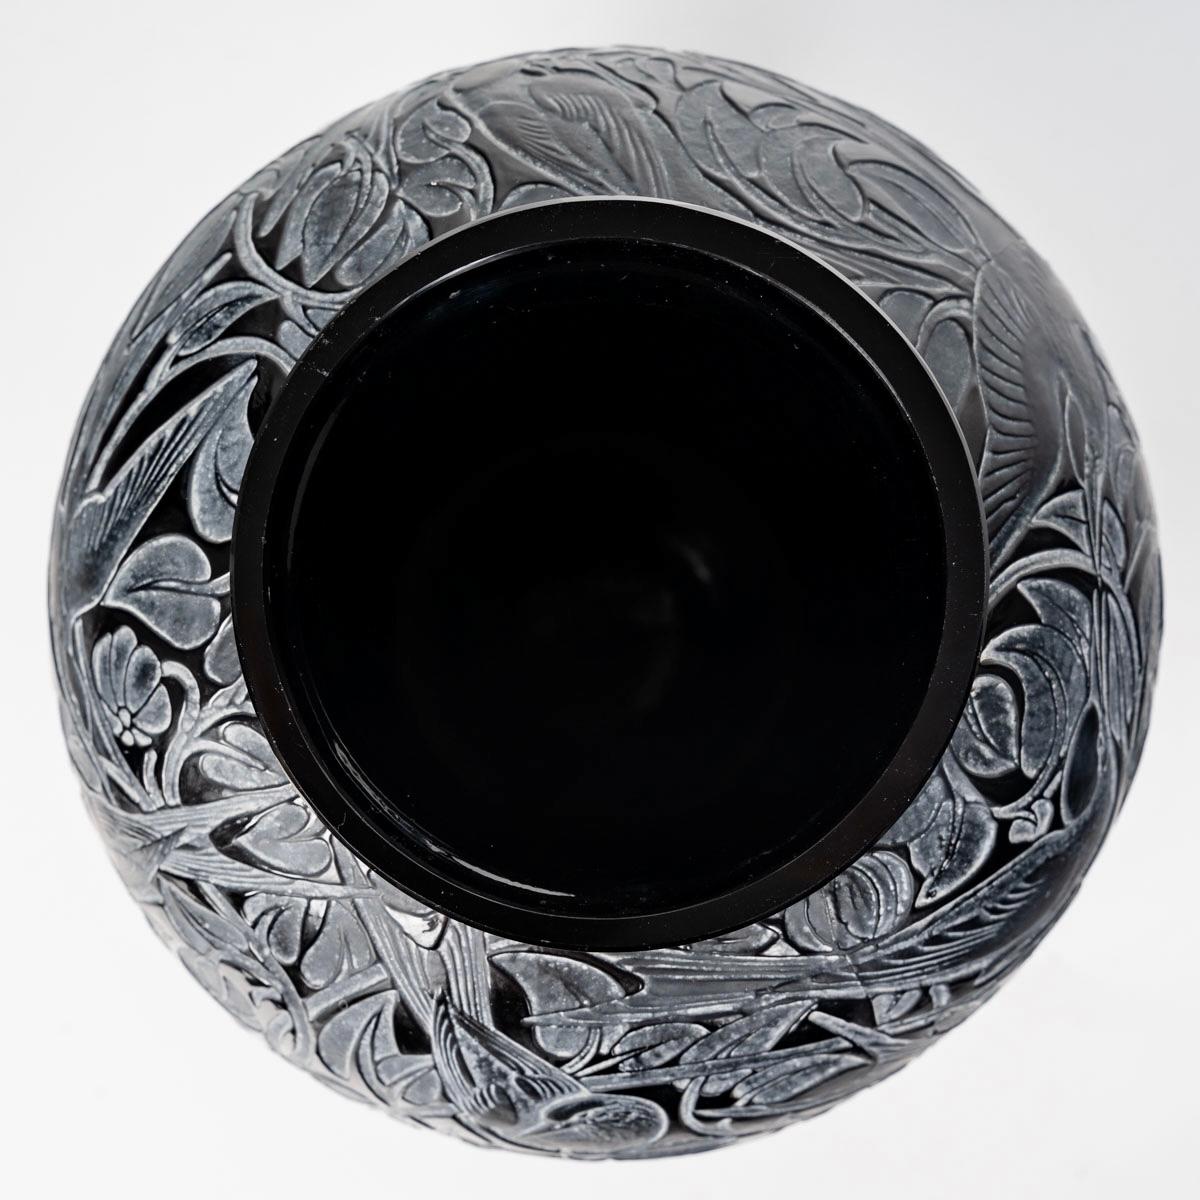 Molded 1923 Rene Lalique - Vase Martin Pecheurs Black Glass with White Patina For Sale